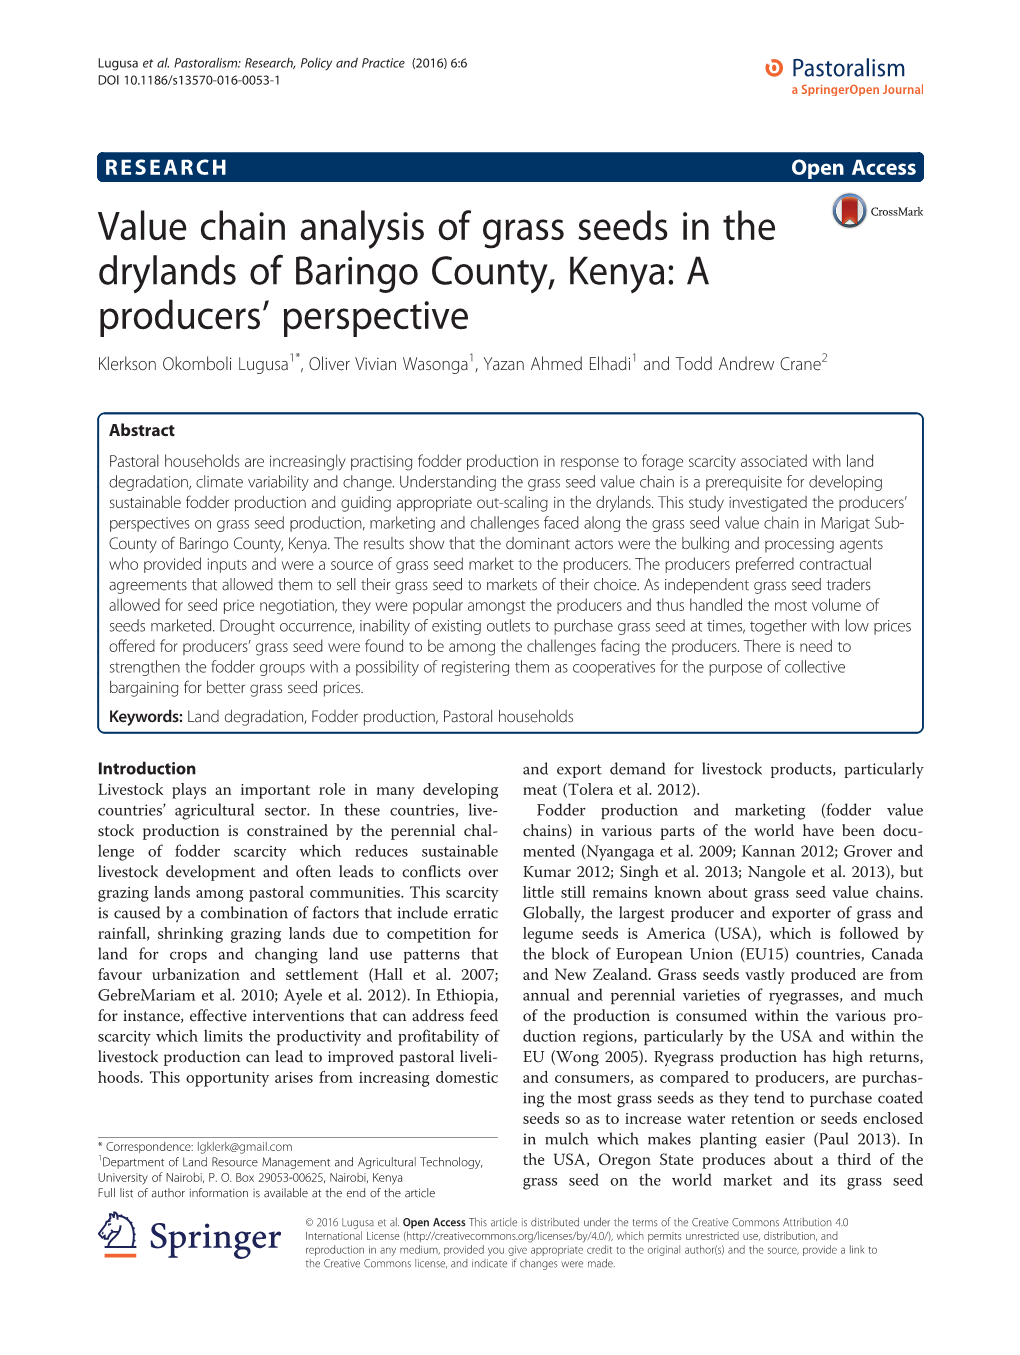 Value Chain Analysis of Grass Seeds in the Drylands of Baringo County